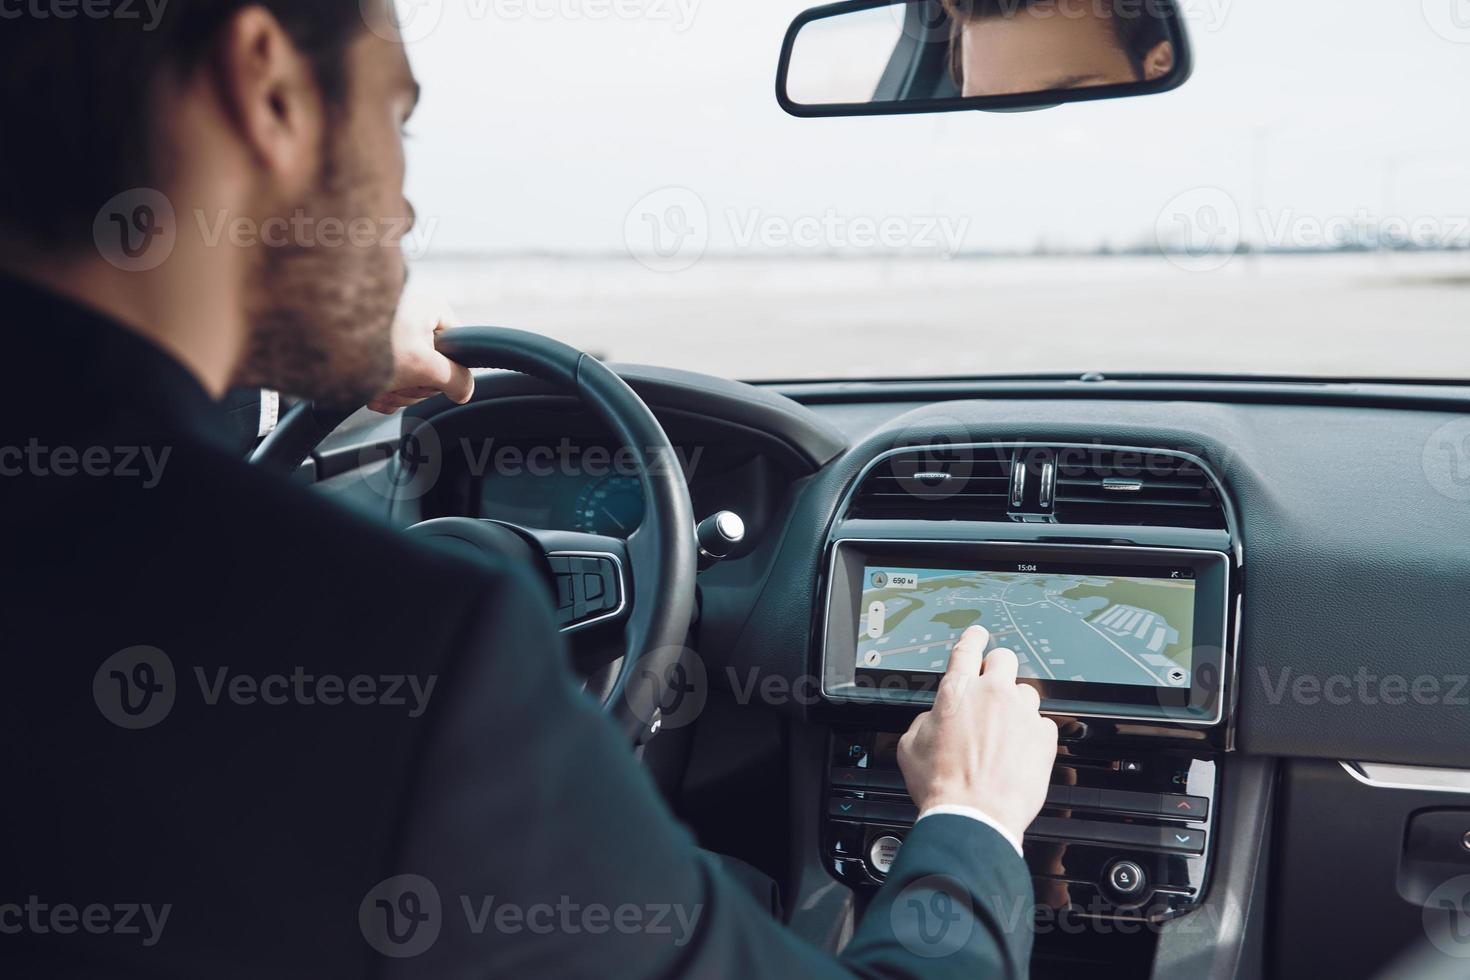 Getting around the city. Rear view of young man in full suit using global positioning system device to check the map while driving a car photo